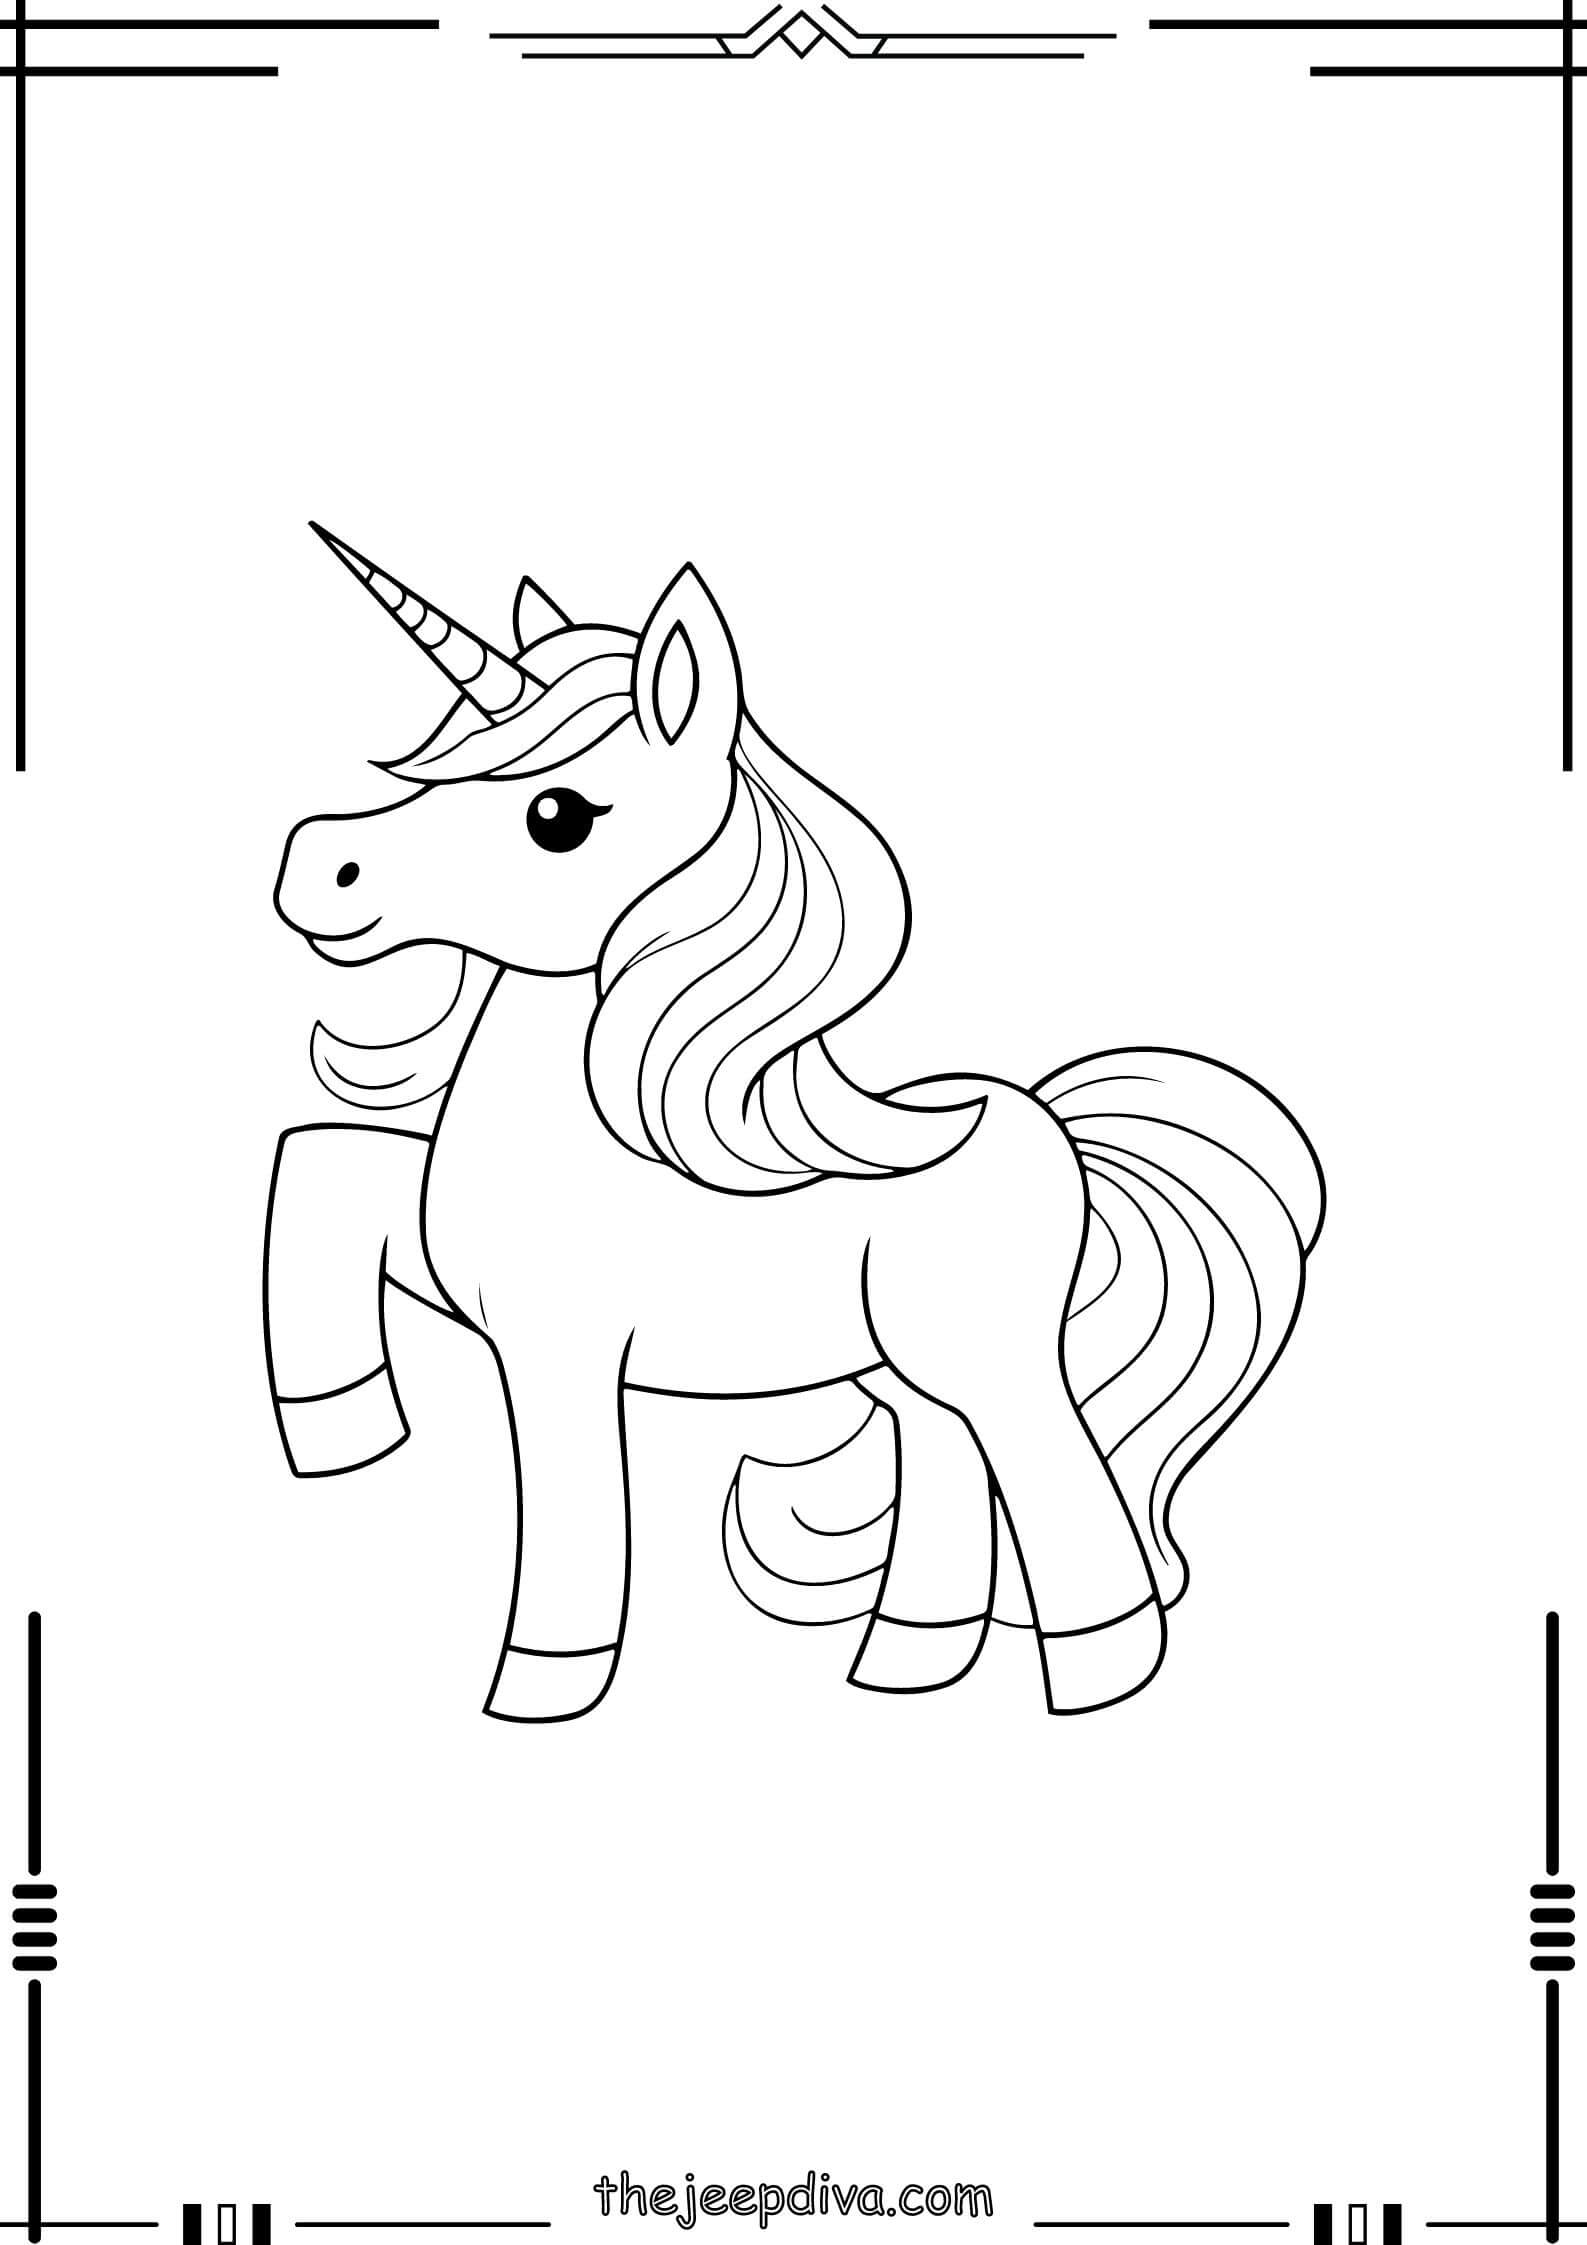 unicorn-coloring-page-easy-4